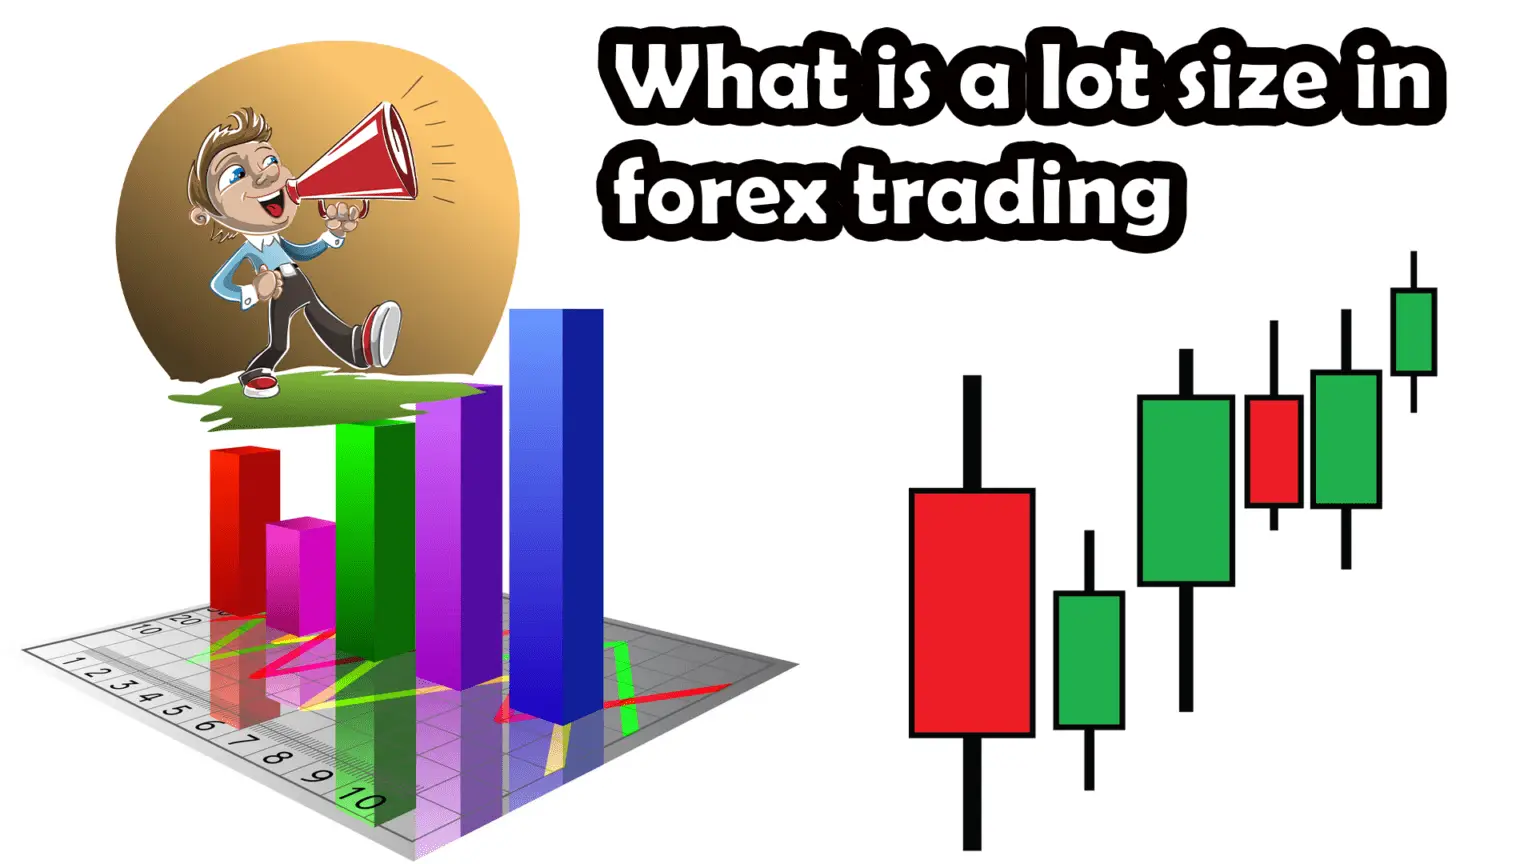 How much is a lot in forex